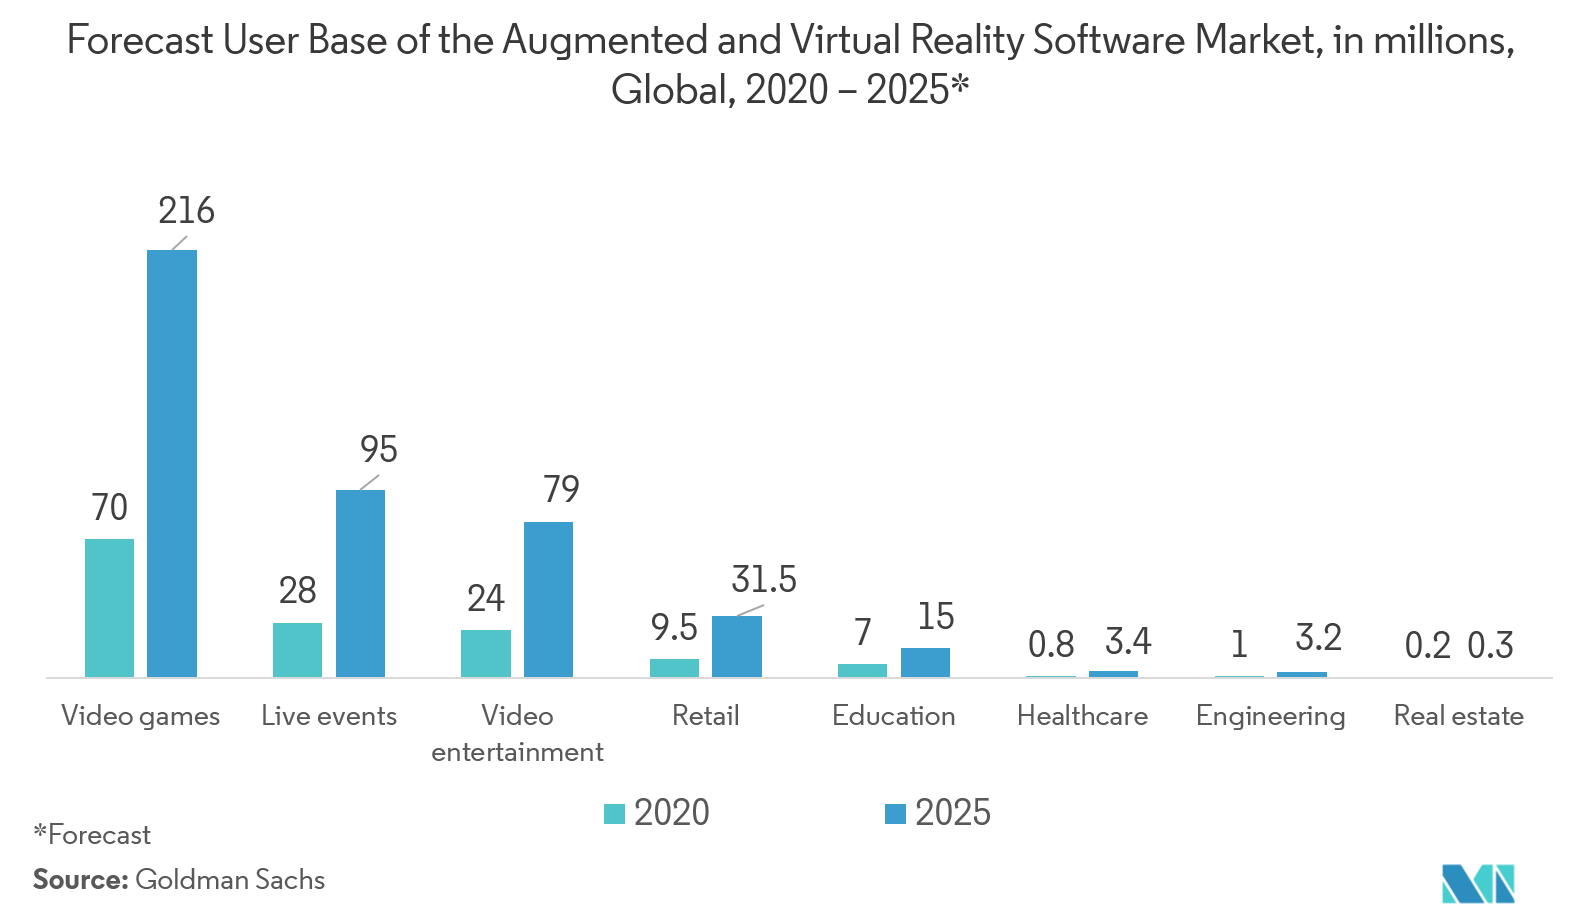 Augmented Reality Market: Forecast User Base of the Augmented and Virtual Reality Software Market, in millions, Global, 2020 - 2025